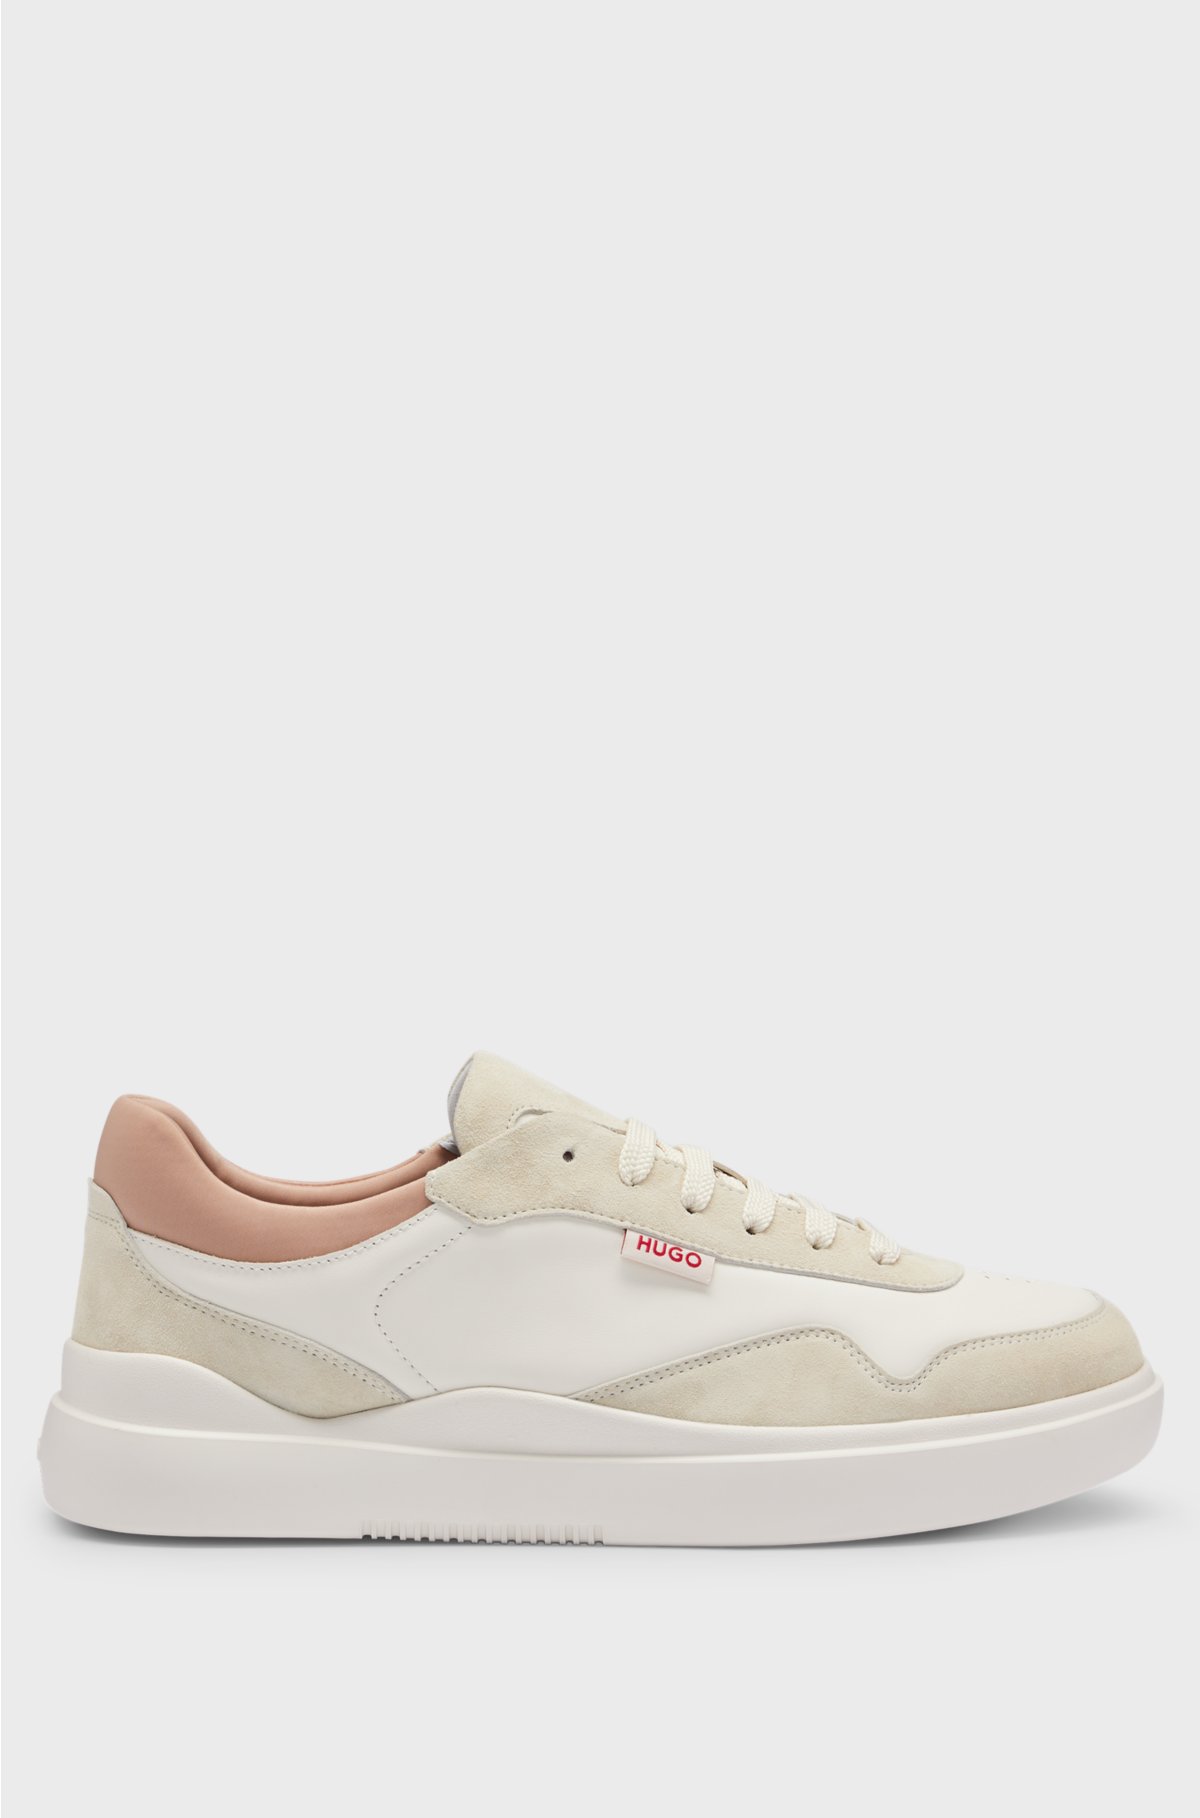 Cupsole-style trainers in leather and suede, White